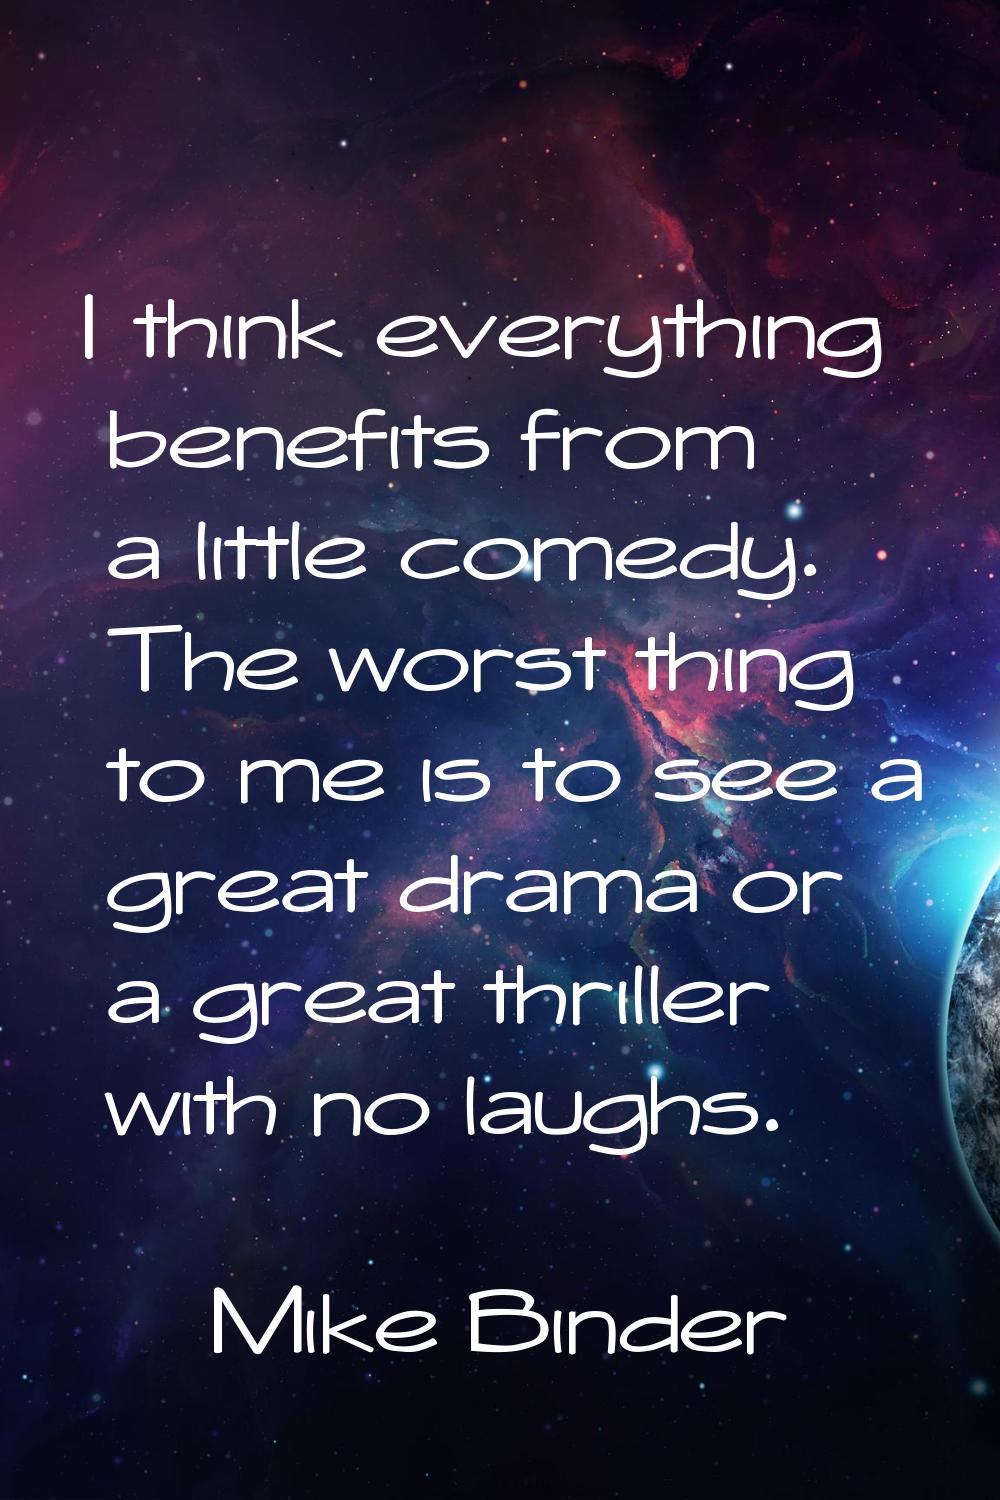 I think everything benefits from a little comedy. The worst thing to me is to see a great drama or 